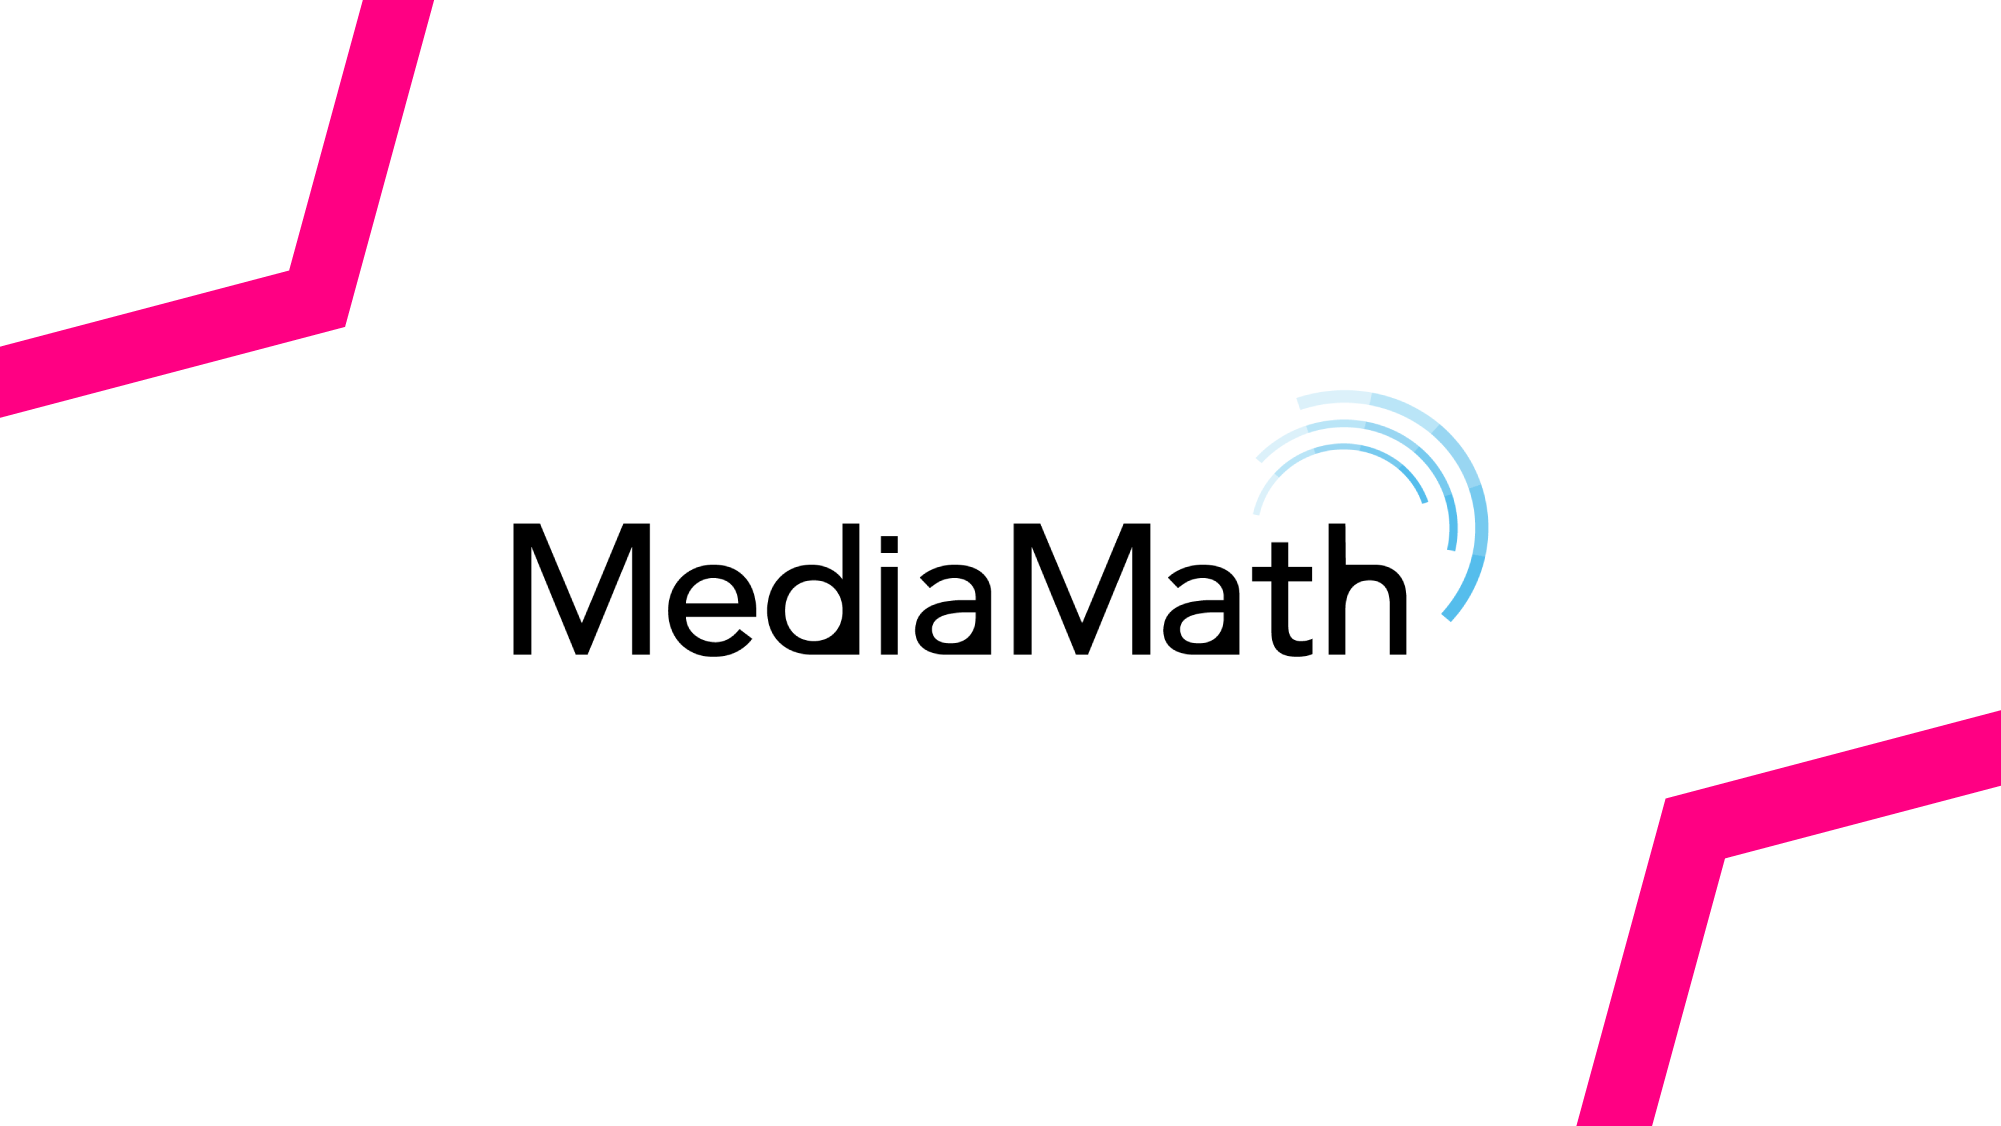 The partnership will enable MediaMath advertisers to access programmatic DOOH inventory globally, through the Hivestack Supply Side Platform (SSP)